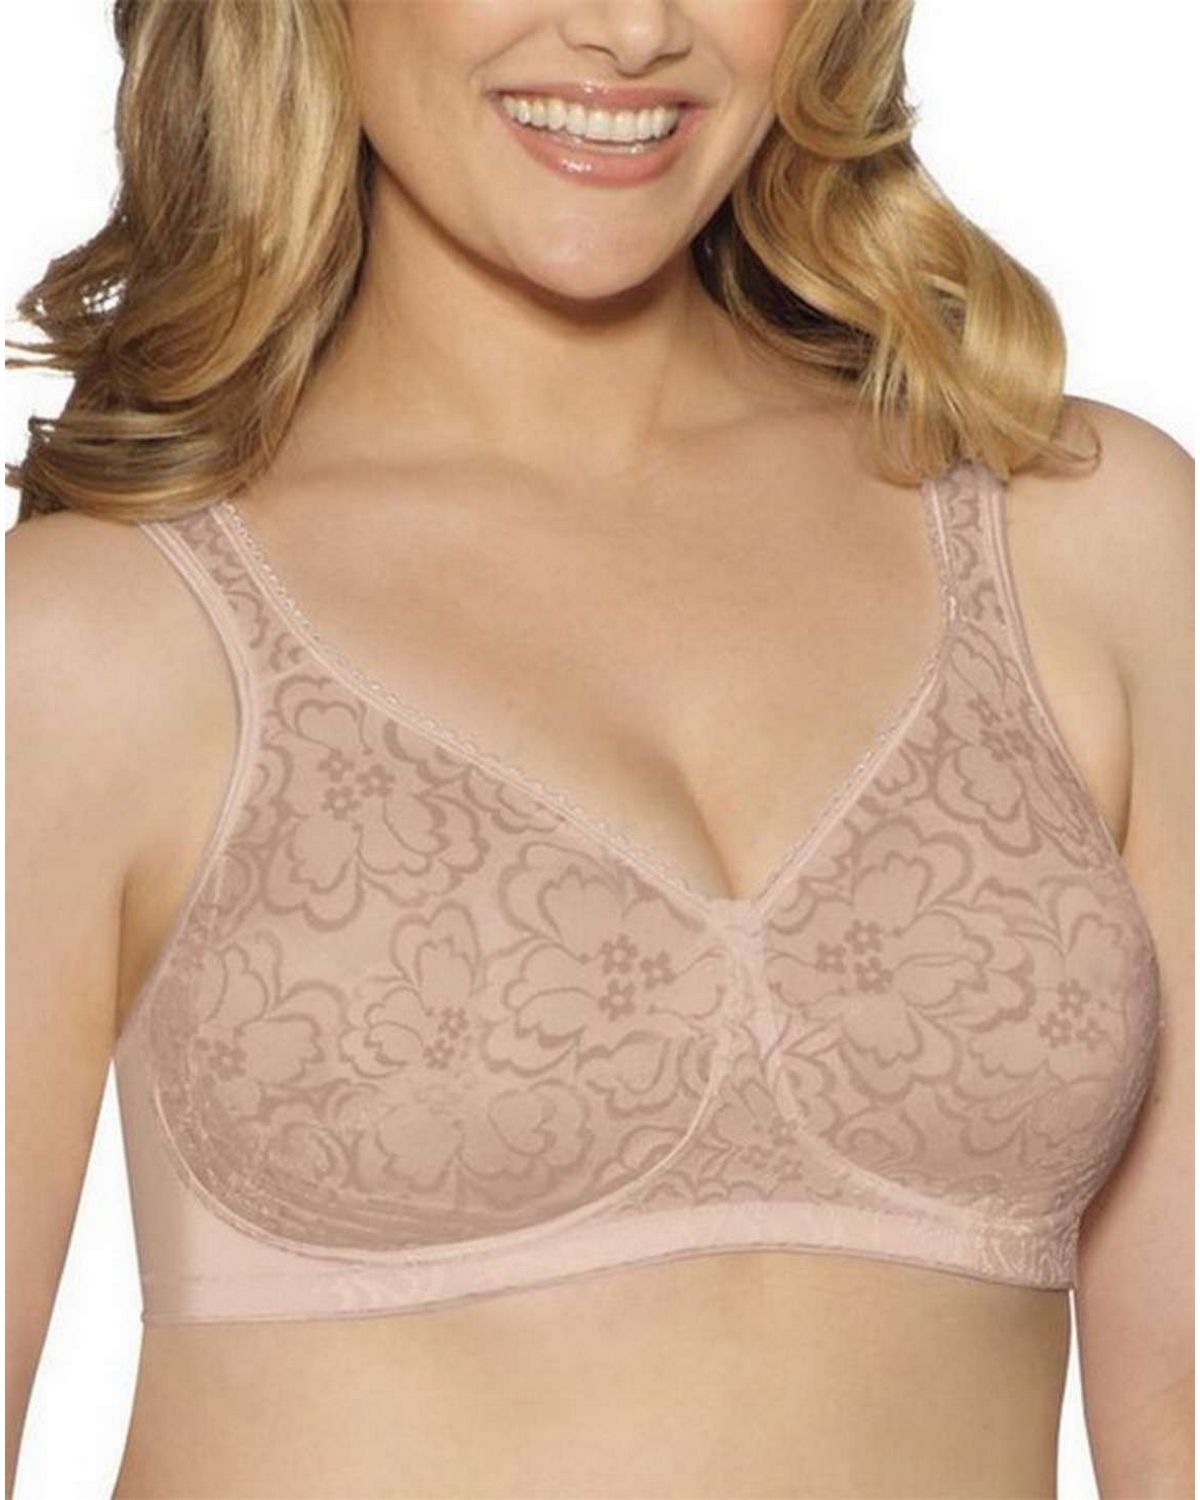 Playtex US4745 Women's Hour Ultimate Lift and Support Bra